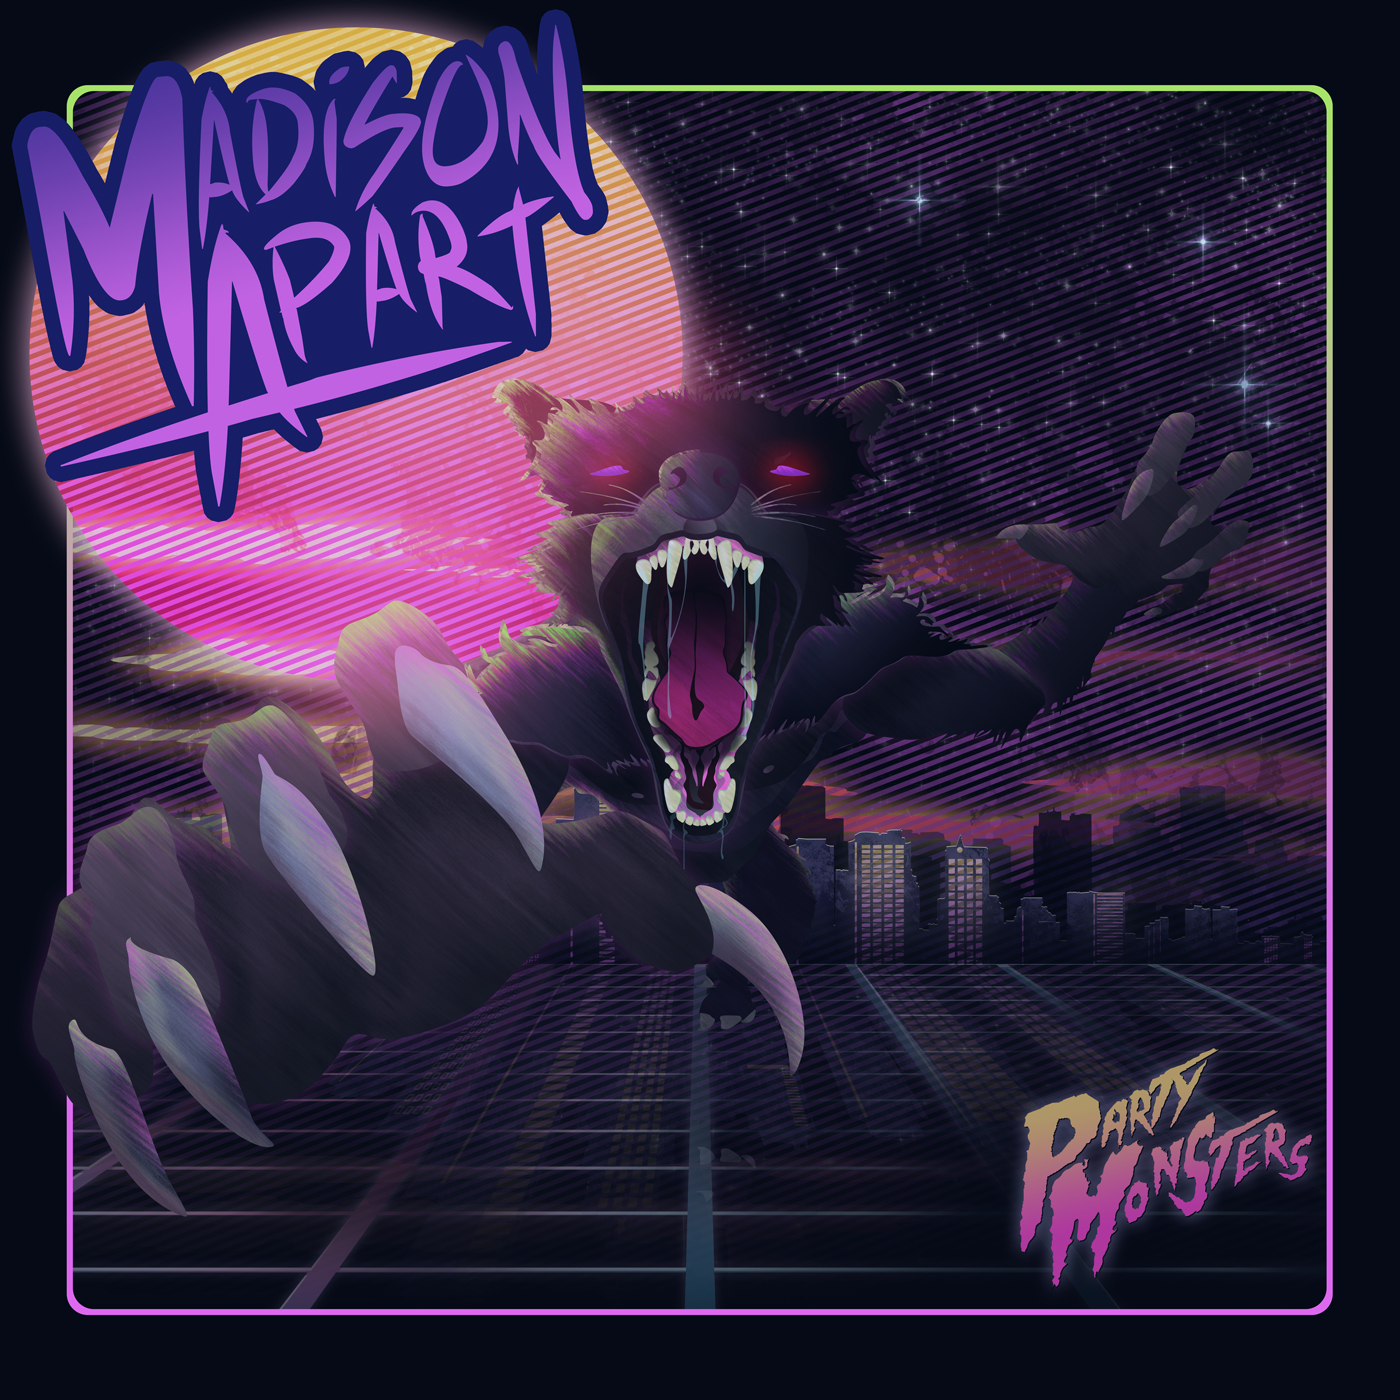  Madison Apart - Party Monsters [EP] (2015)